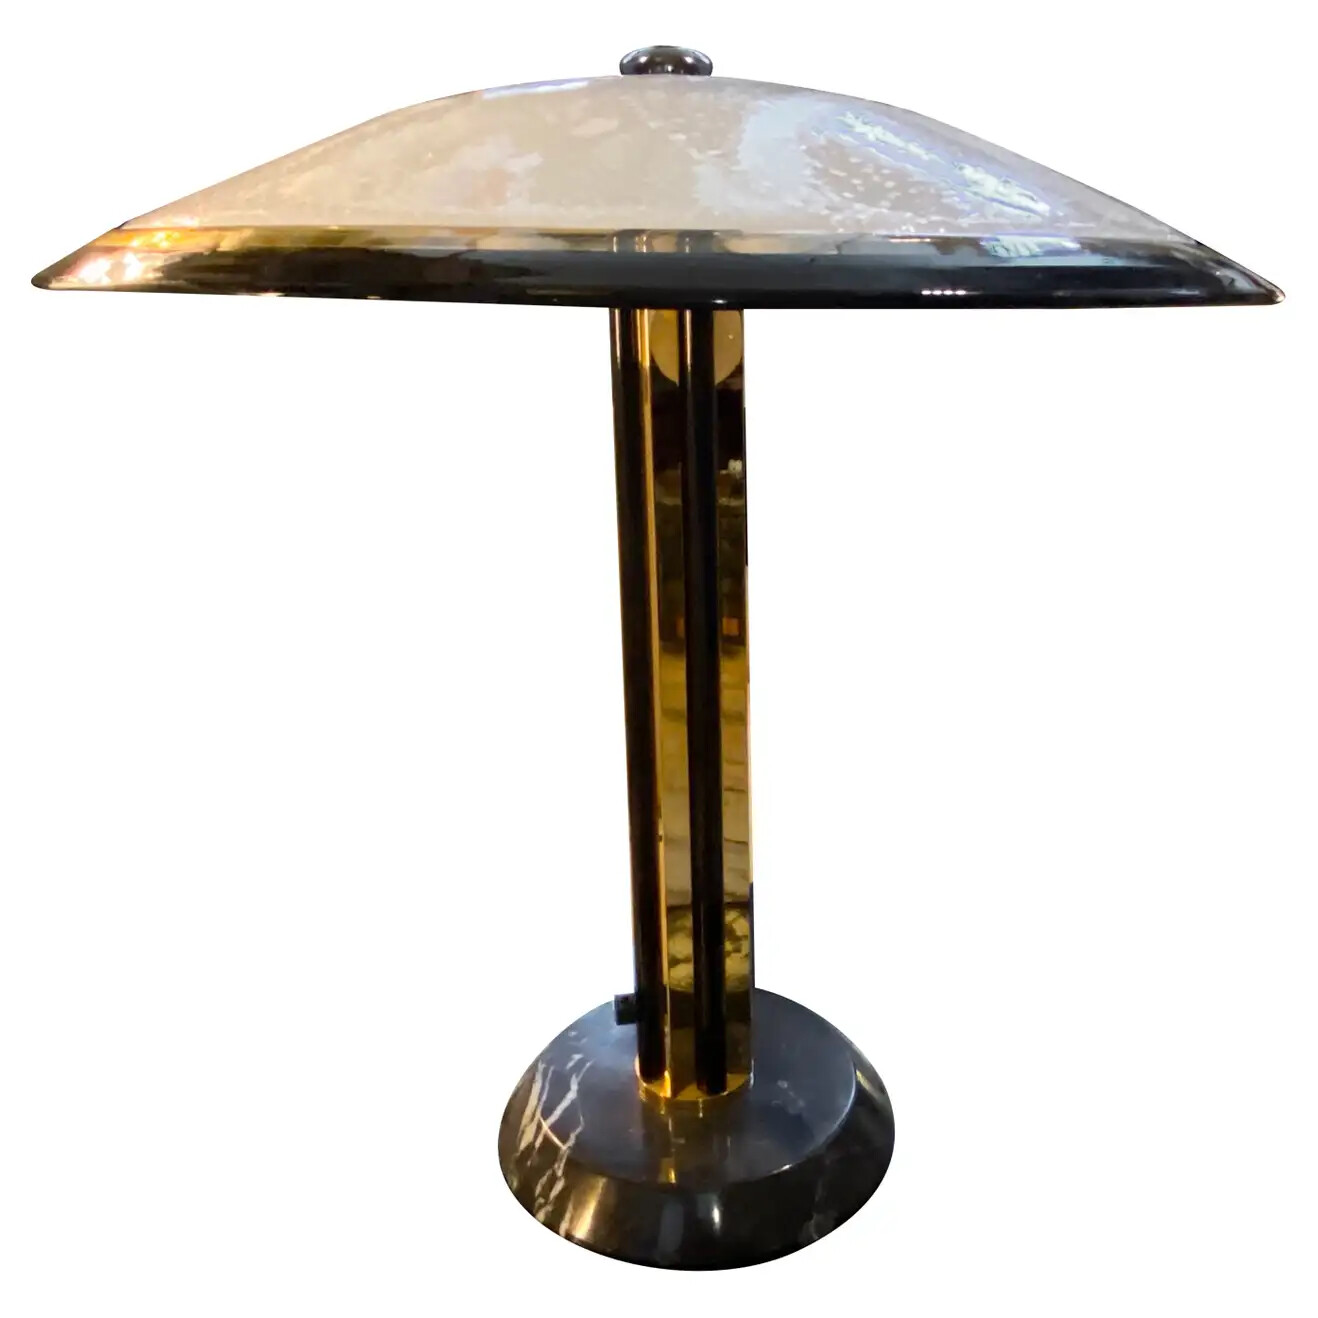 1970s Hollywood Regency High Quality Marble, Brass and Glass Italian Table Lamp